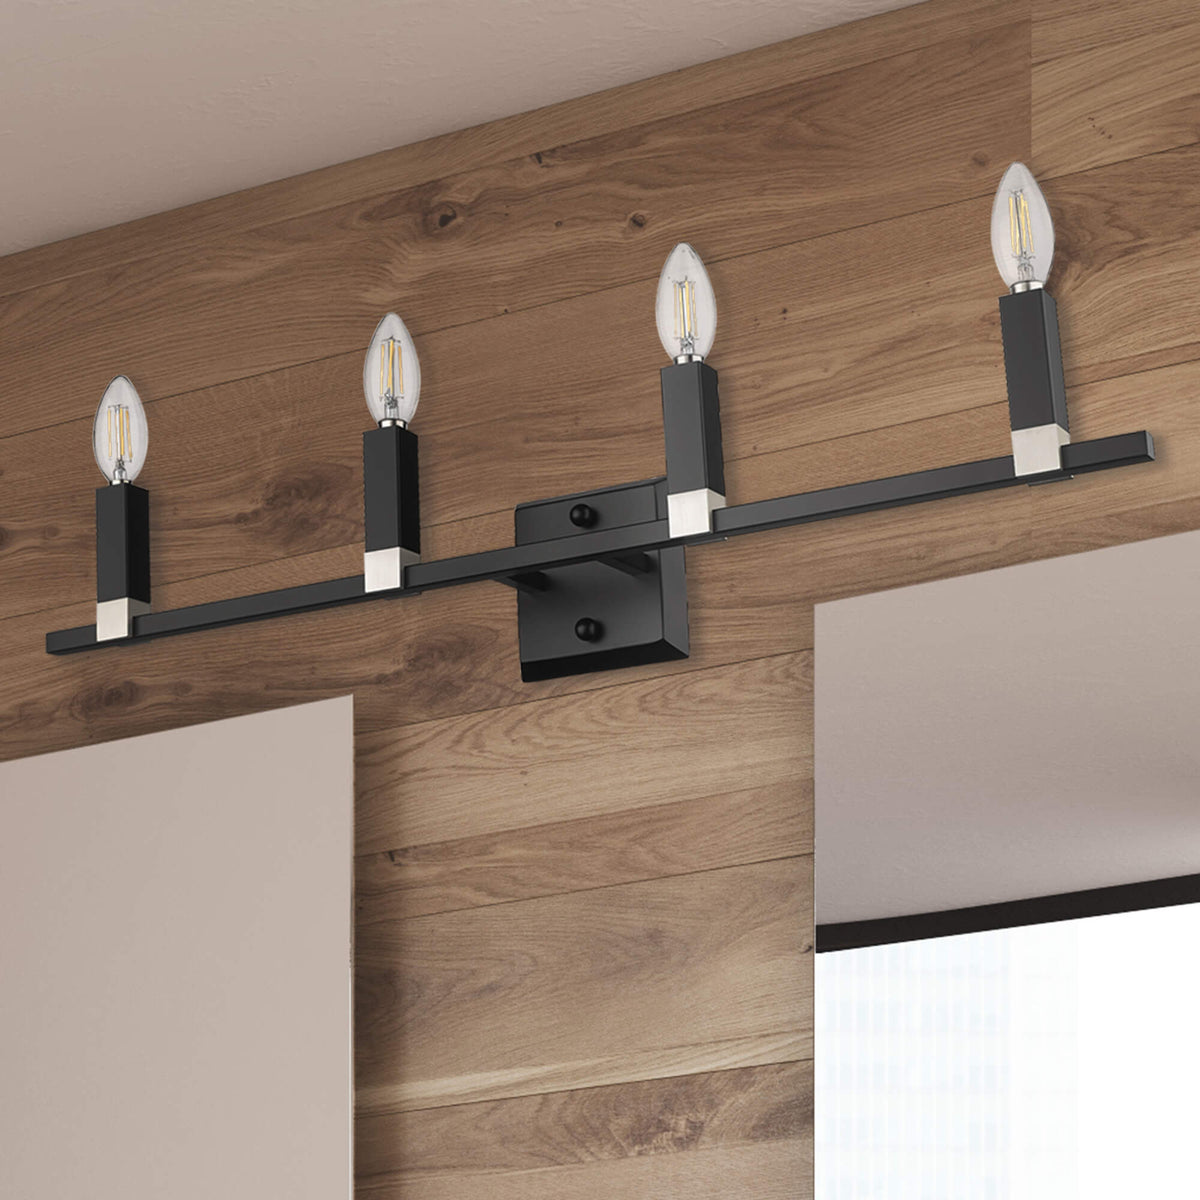 Modern black candle vanity light wall sconces over mirror